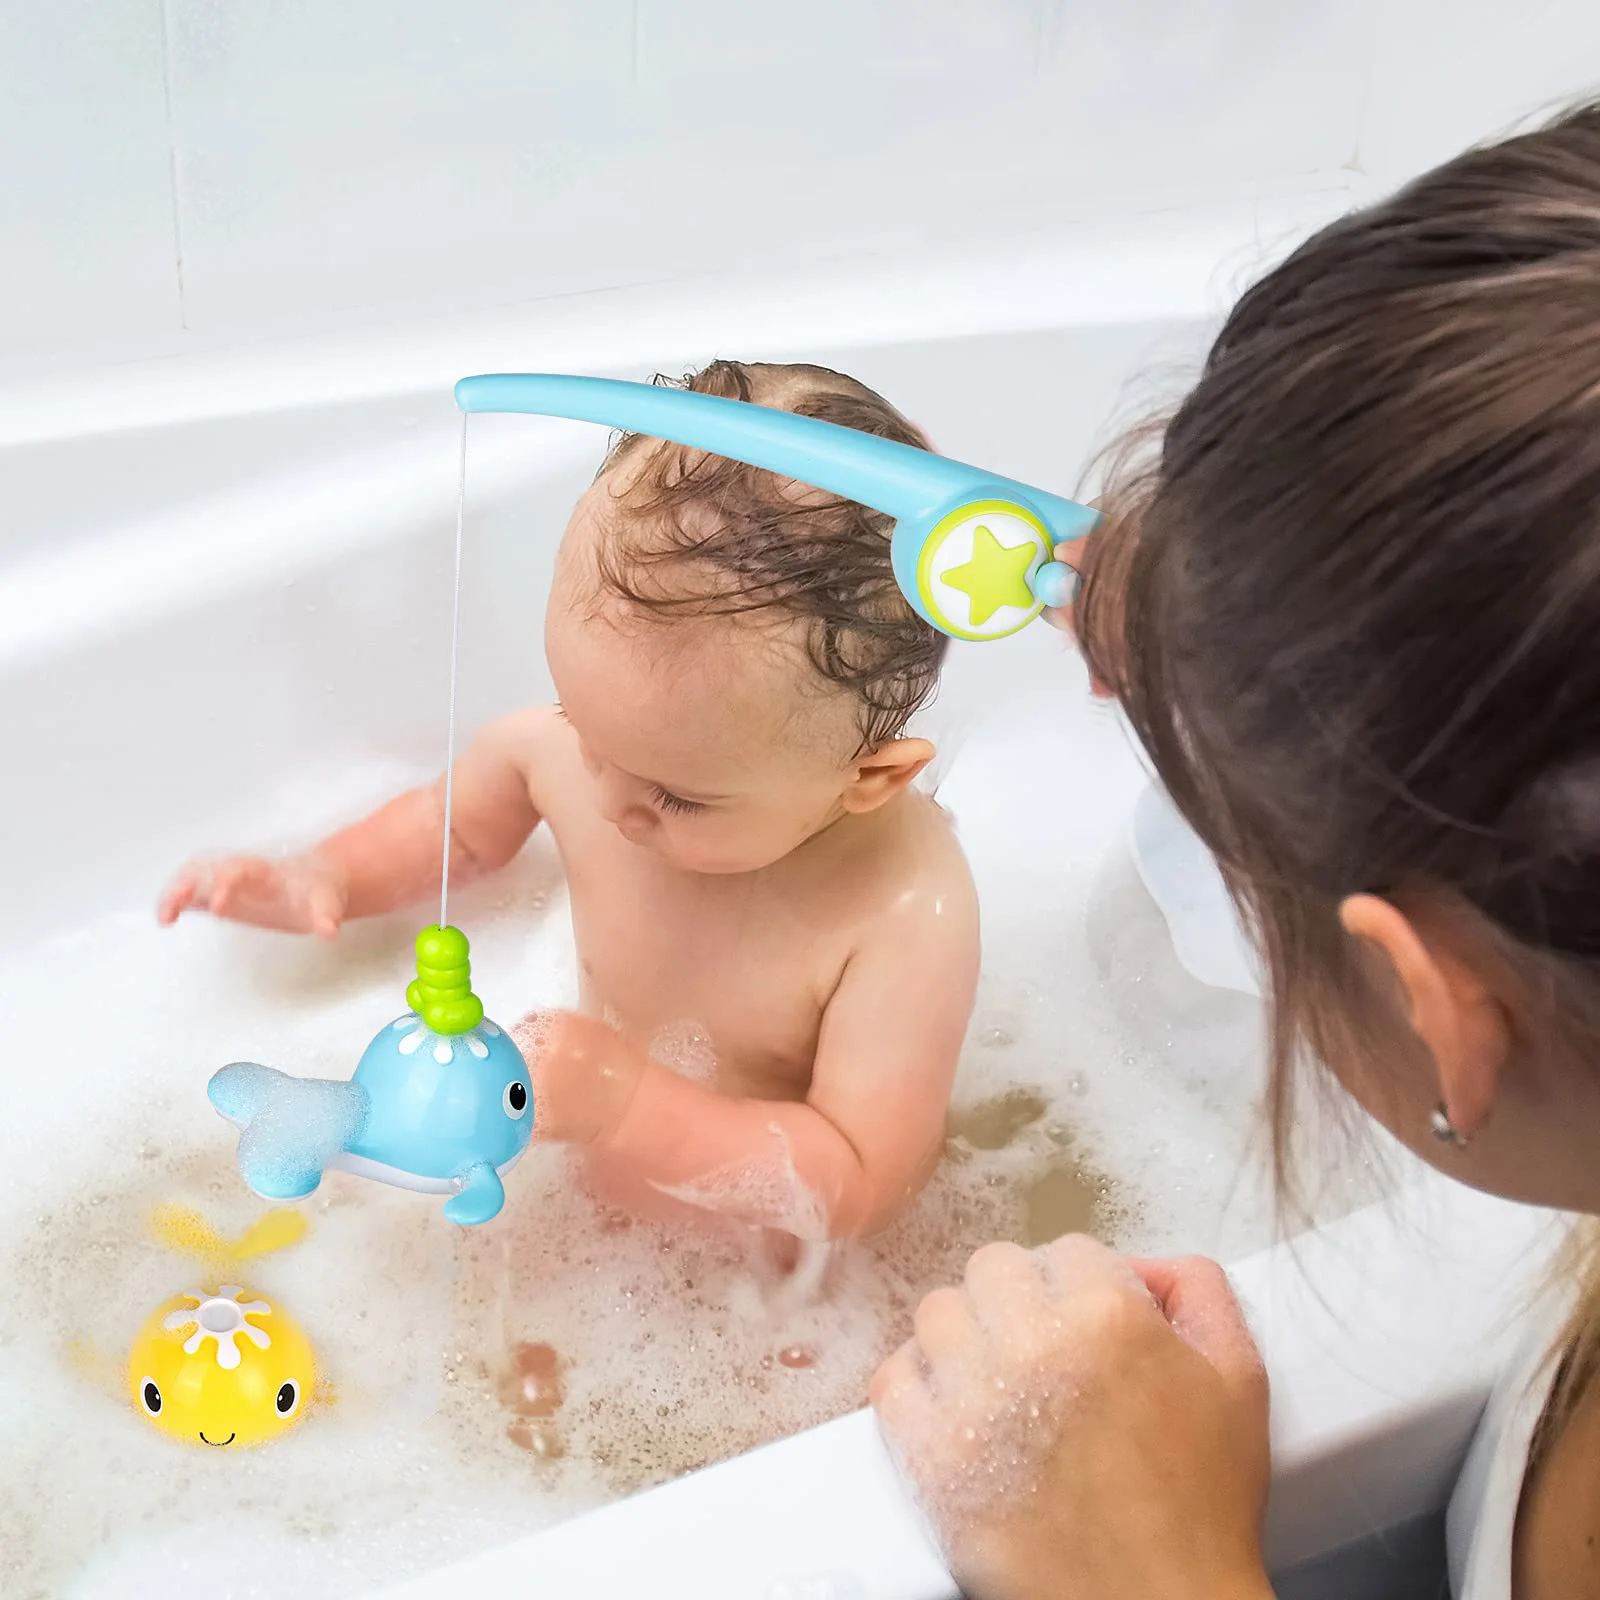 https://ae01.alicdn.com/kf/Sca06412a90984b50bbcb7cc5a42011f7Q/Baby-Magnetic-Fishing-Games-Pool-Fun-Time-Bathtub-Toys-For-Toddlers-Play-Water-Bath-Toy-Set.jpg